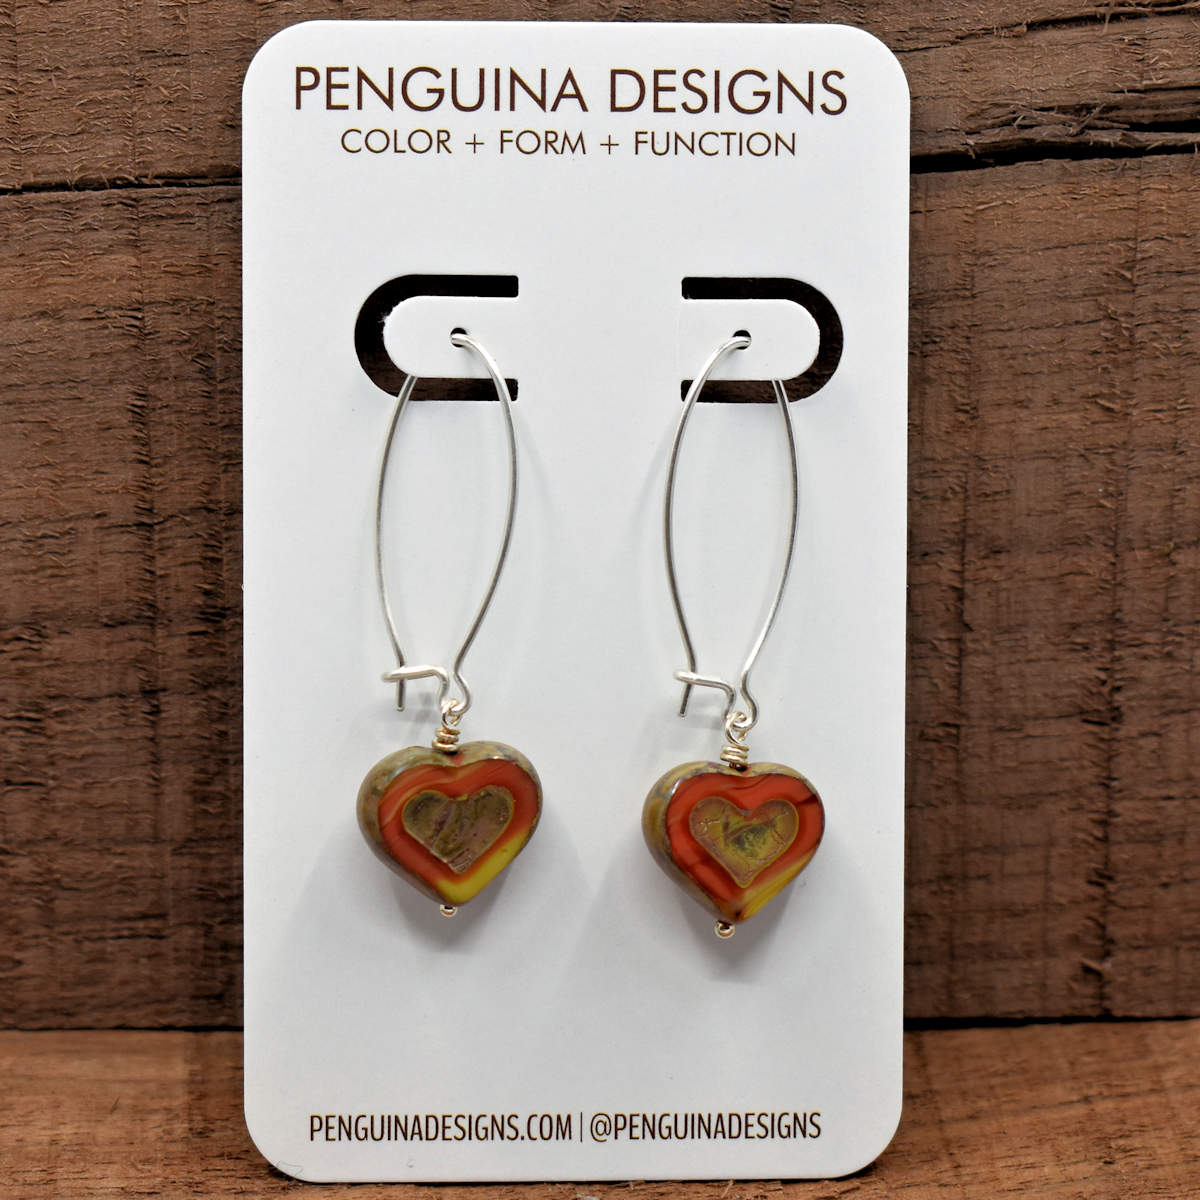 A pair of earrings on a white card rest against a wood background. The earrings have long silver oval wires that latch with heart beads at the bottom that are a vaiegated dark orange and yellow. The hearts are cut to show the colored glass in a wide outline around the outer part, leaving the outside edges and embossed interior heart shape covered in the stone-like tan finish